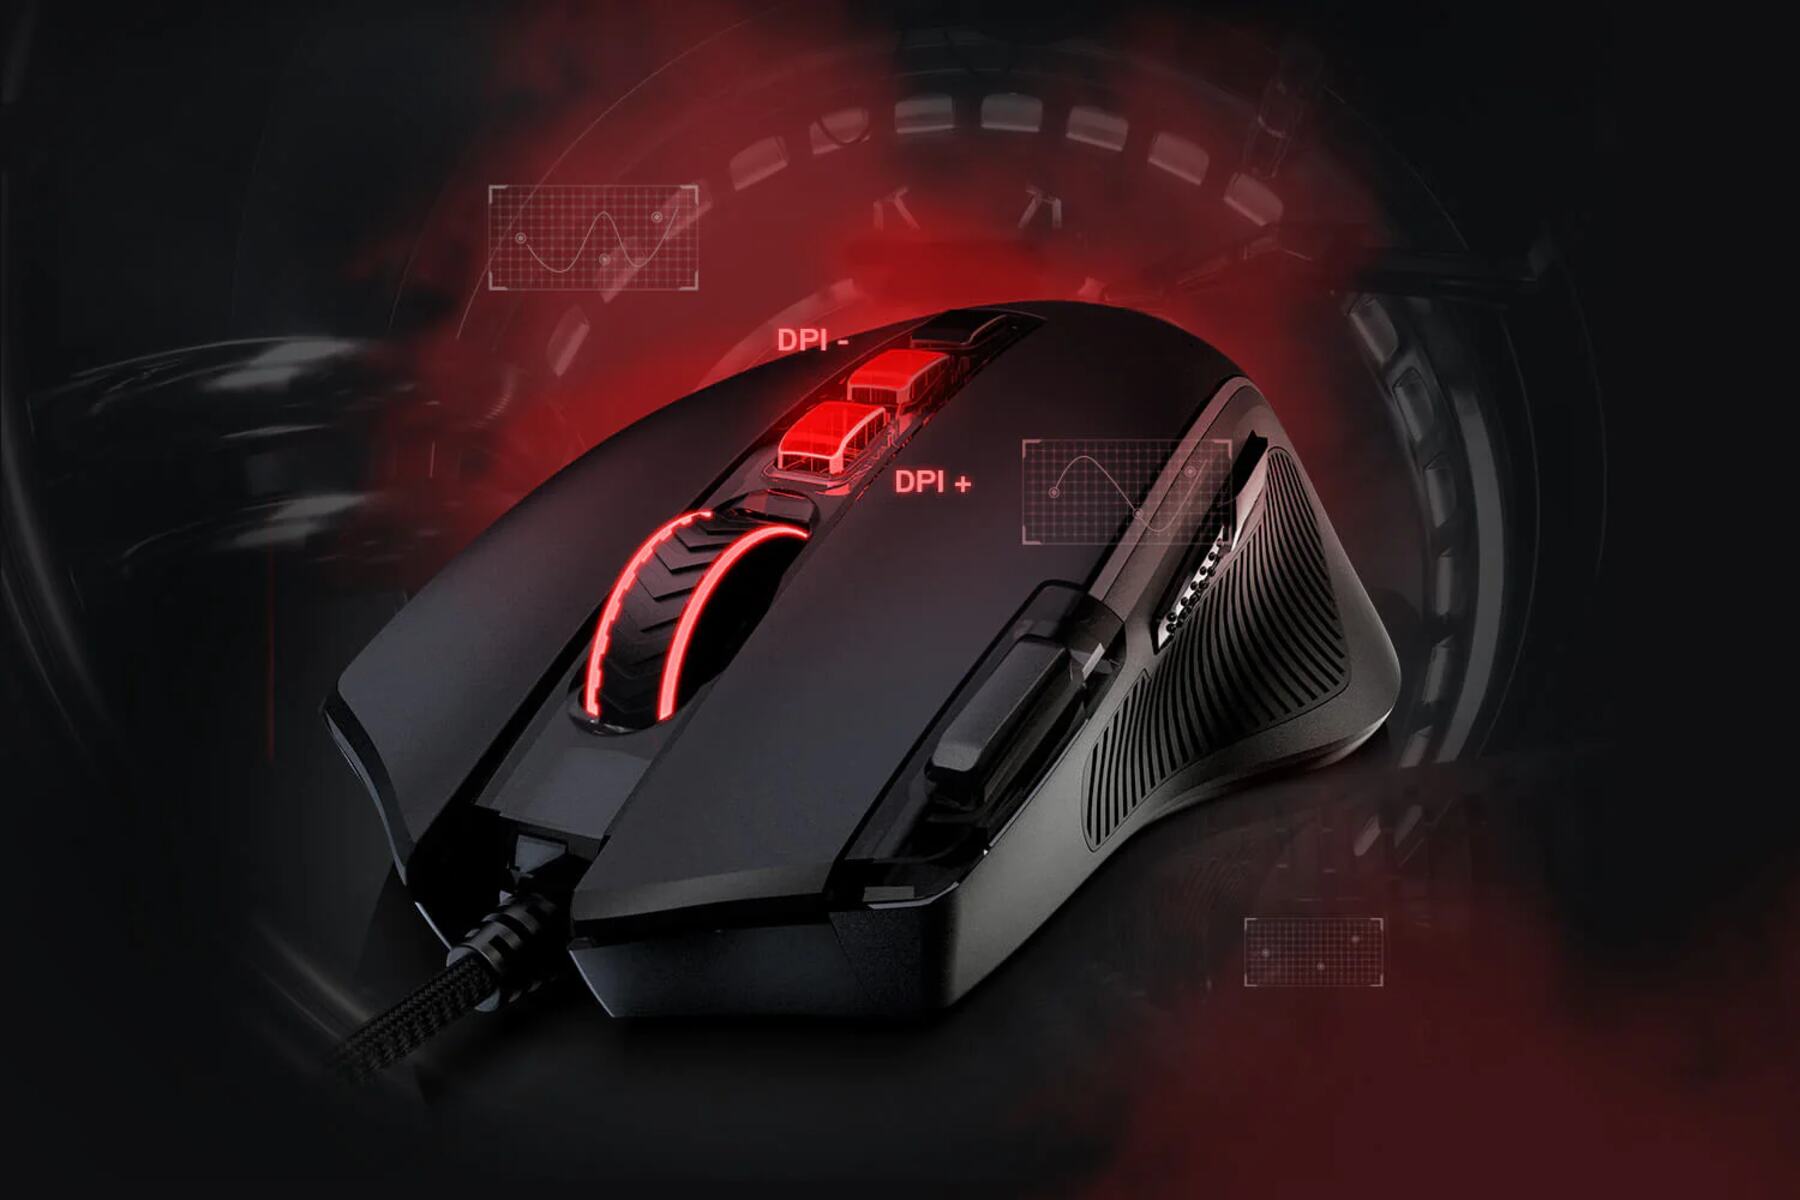 Redragon Max 2000DPI Adjustable 6D Optical USB Wired Gaming Mouse – How To Switch DPI